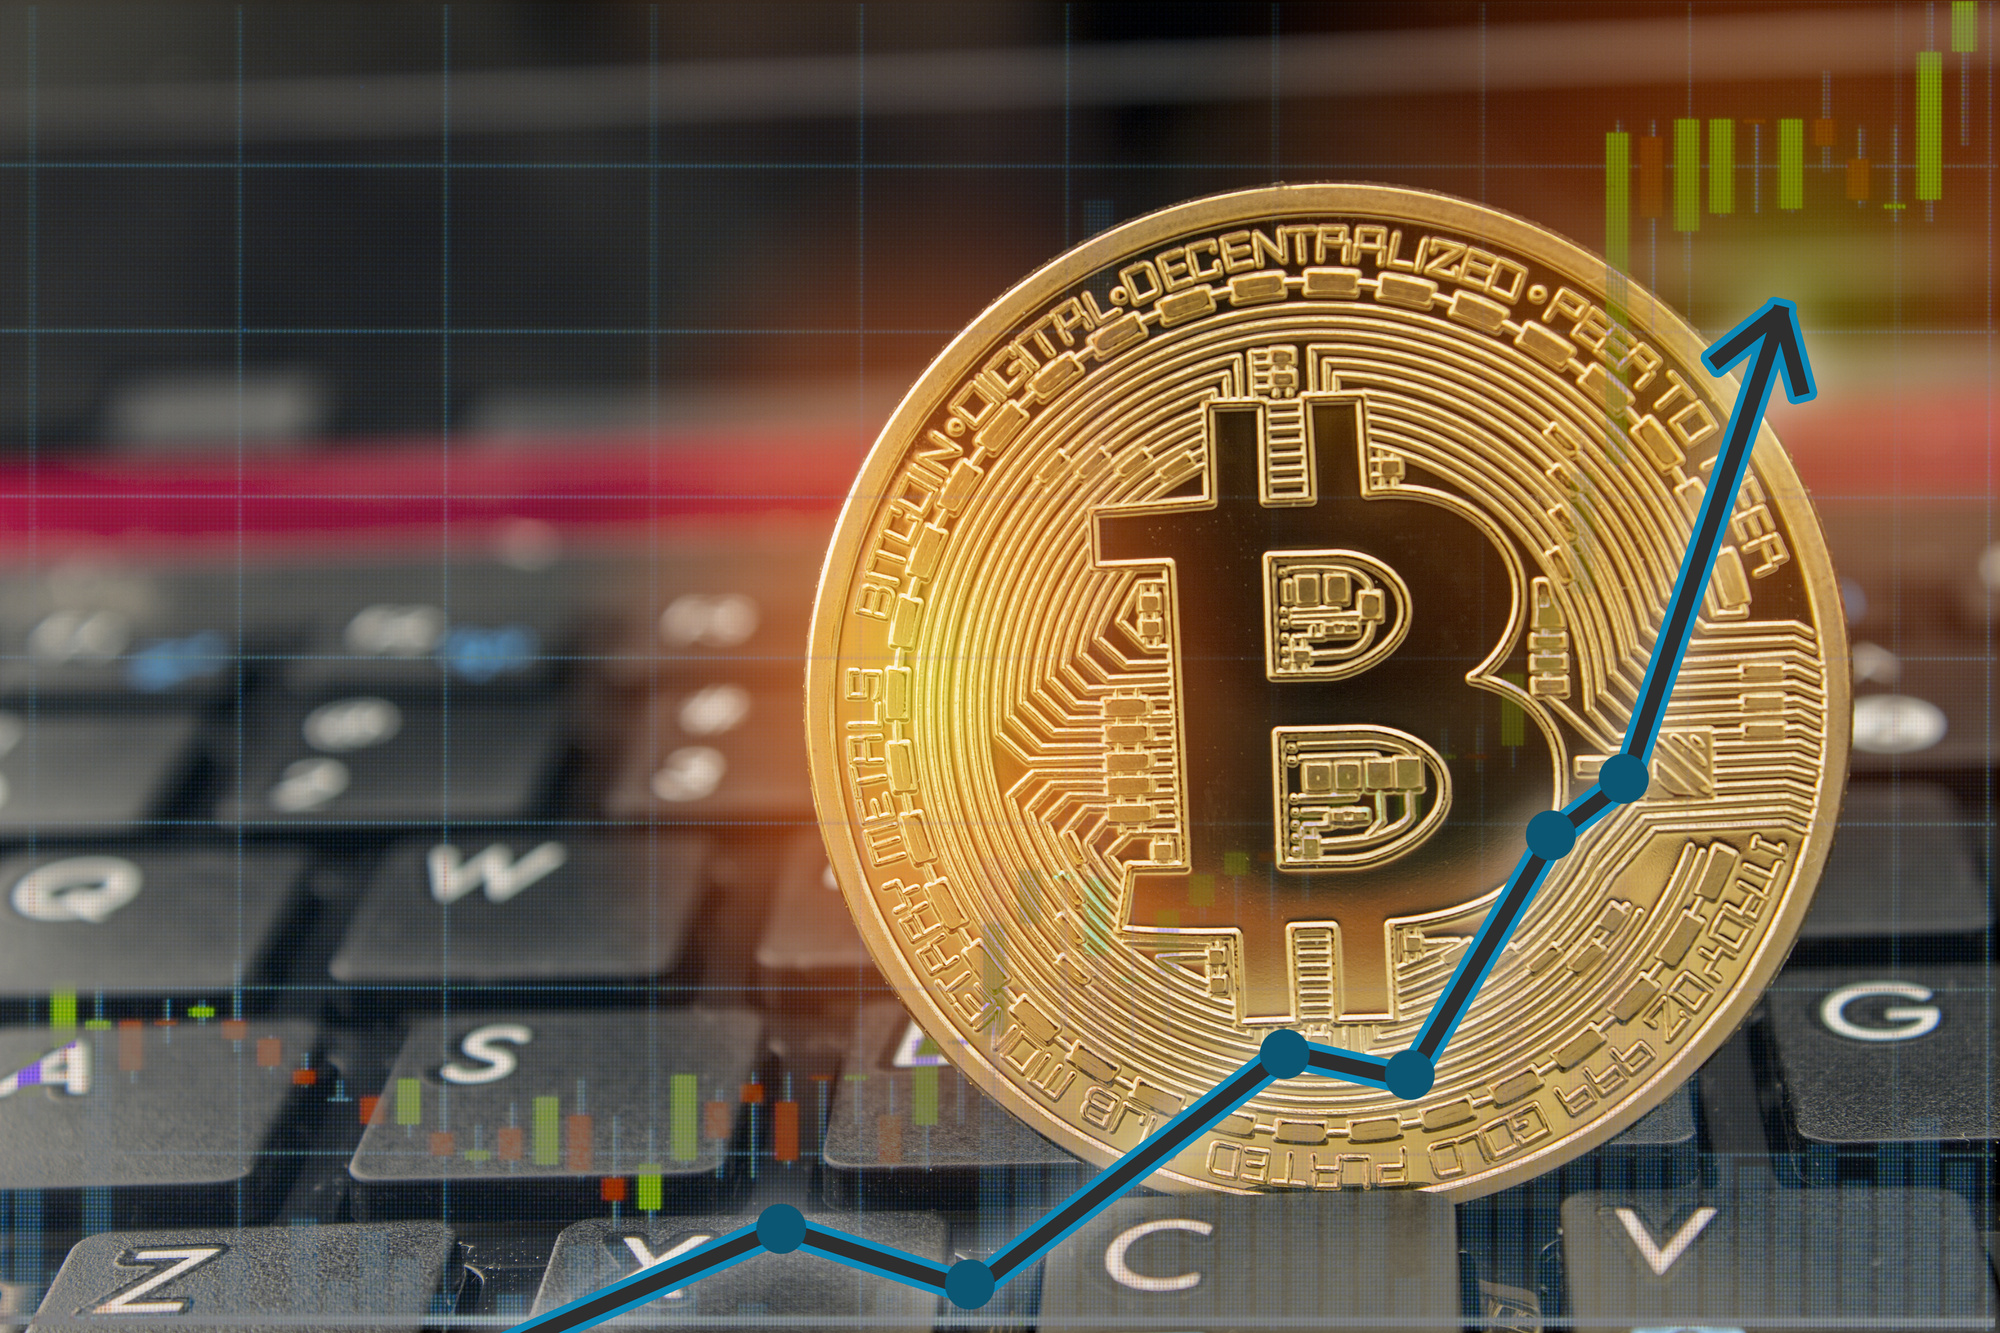 Trading Cryptocurrency Here’s What You Need to Know